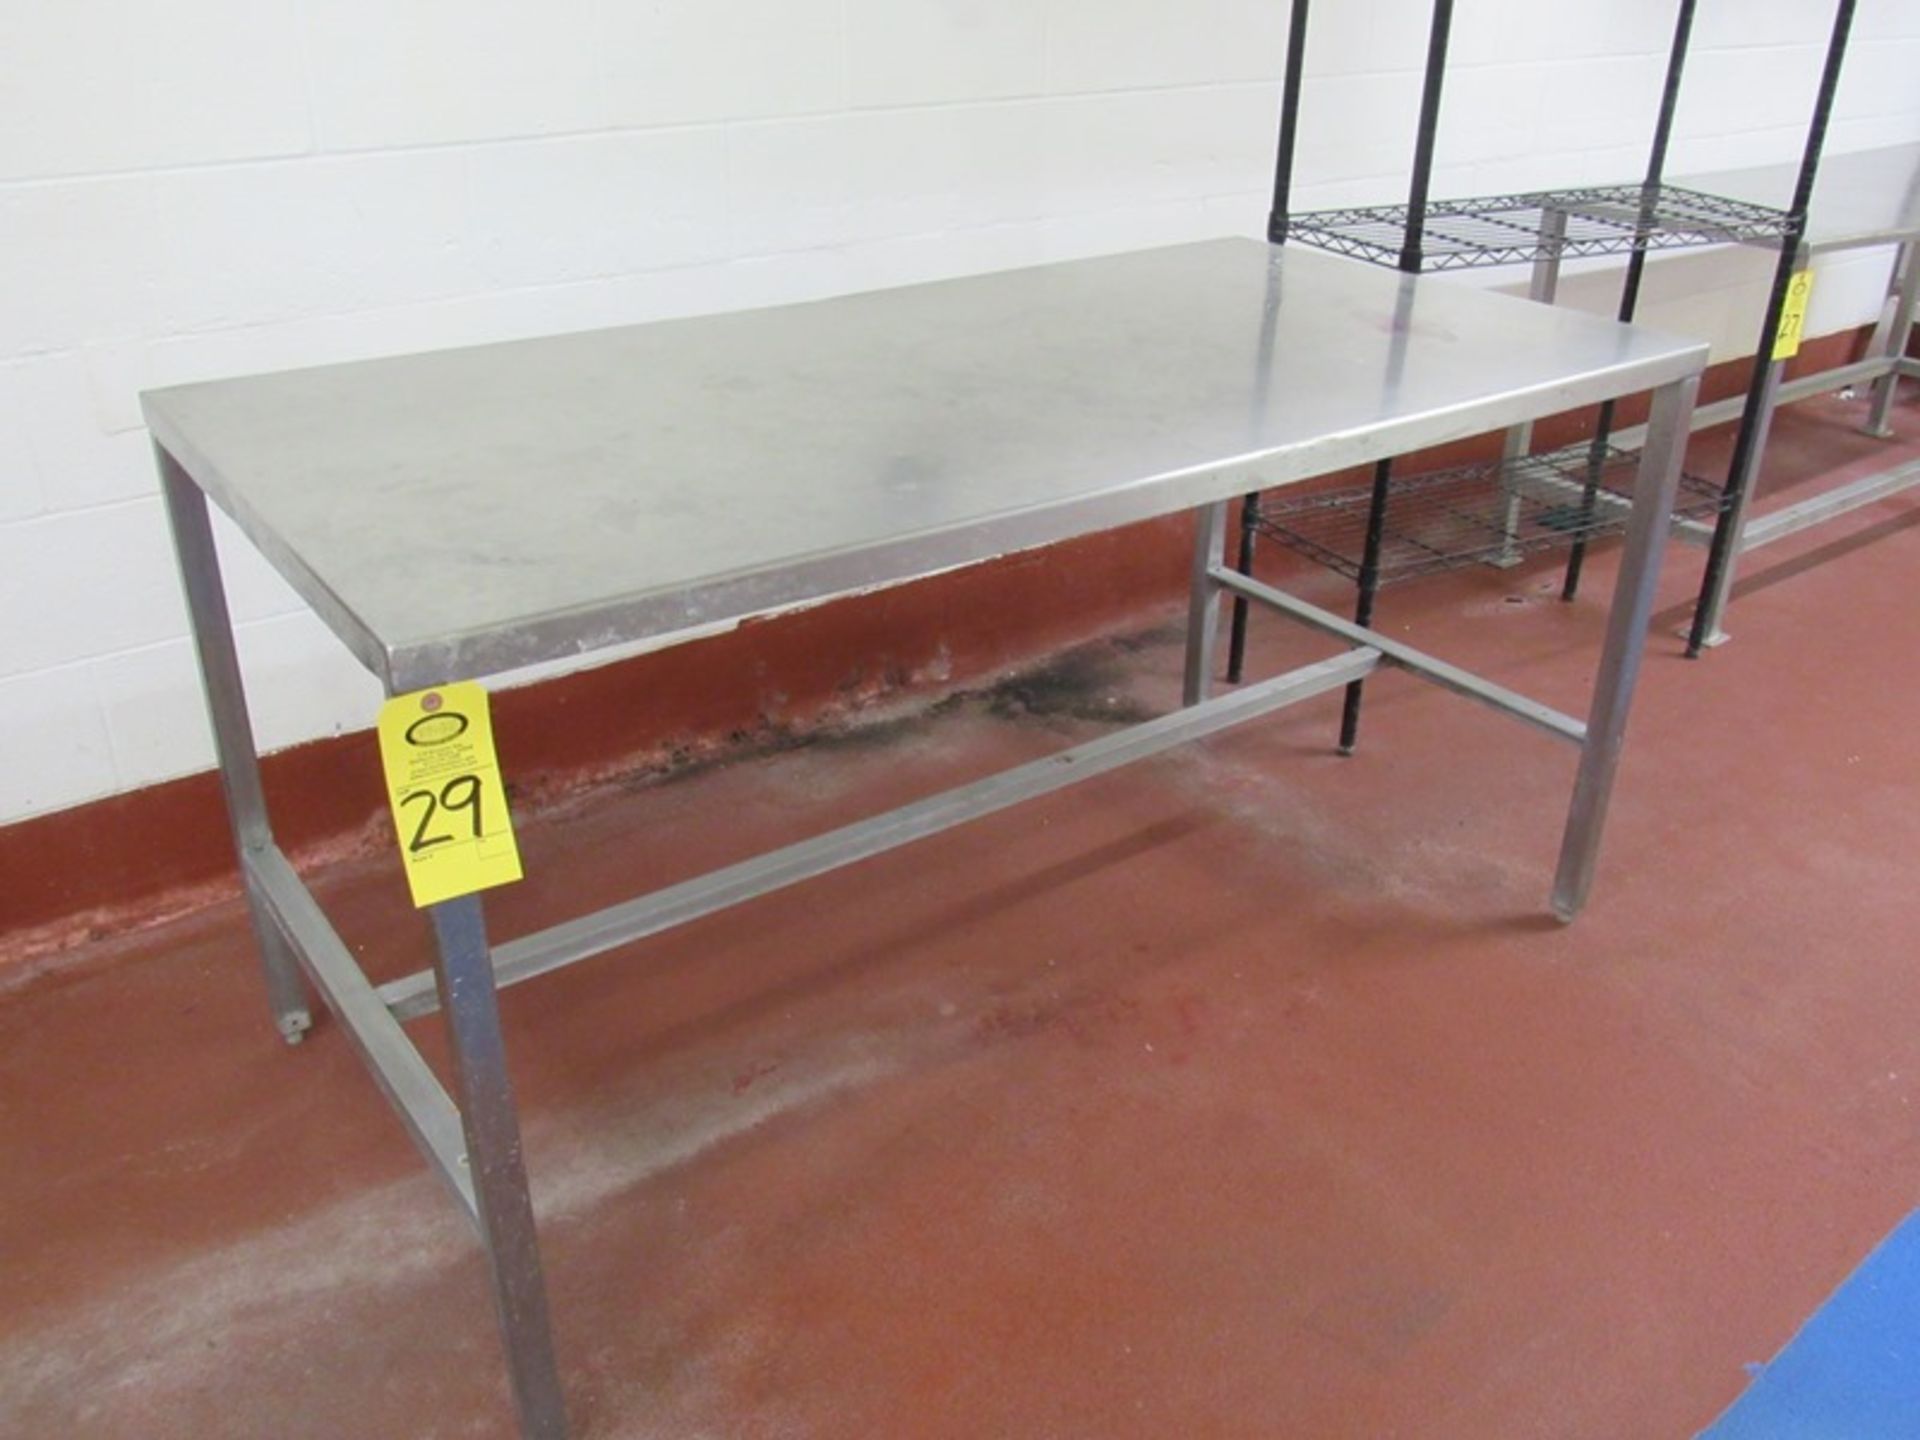 Stainless Steel Table, 32" W X 63" L X 33" T (Required Loading Fee $20.00 Norm Pavlish 402-540-